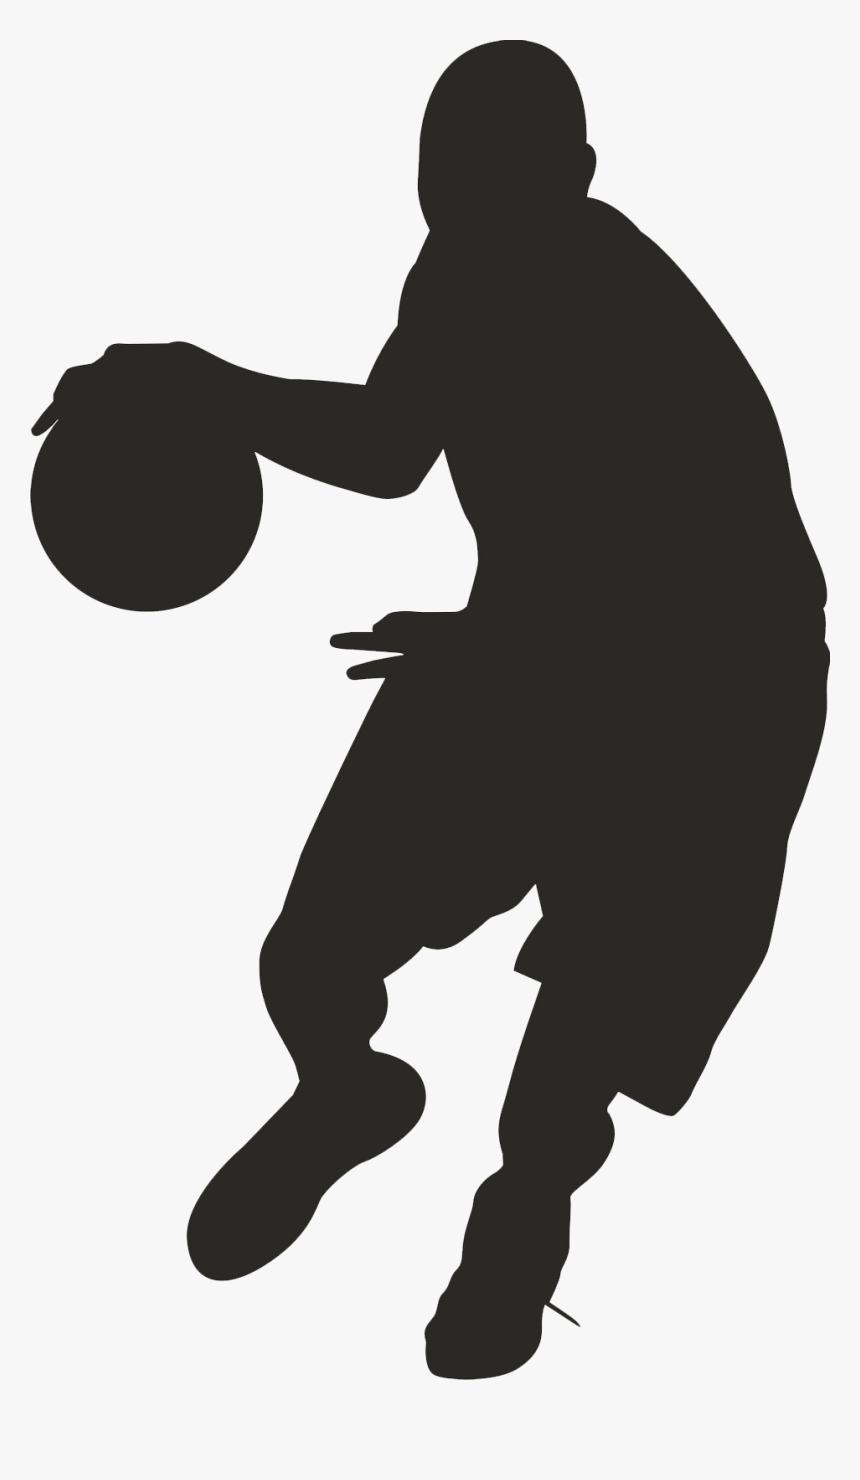 Basketball Player Clipart Png Transparent Image - Basketball Player Clipart Black, Png Download, Free Download